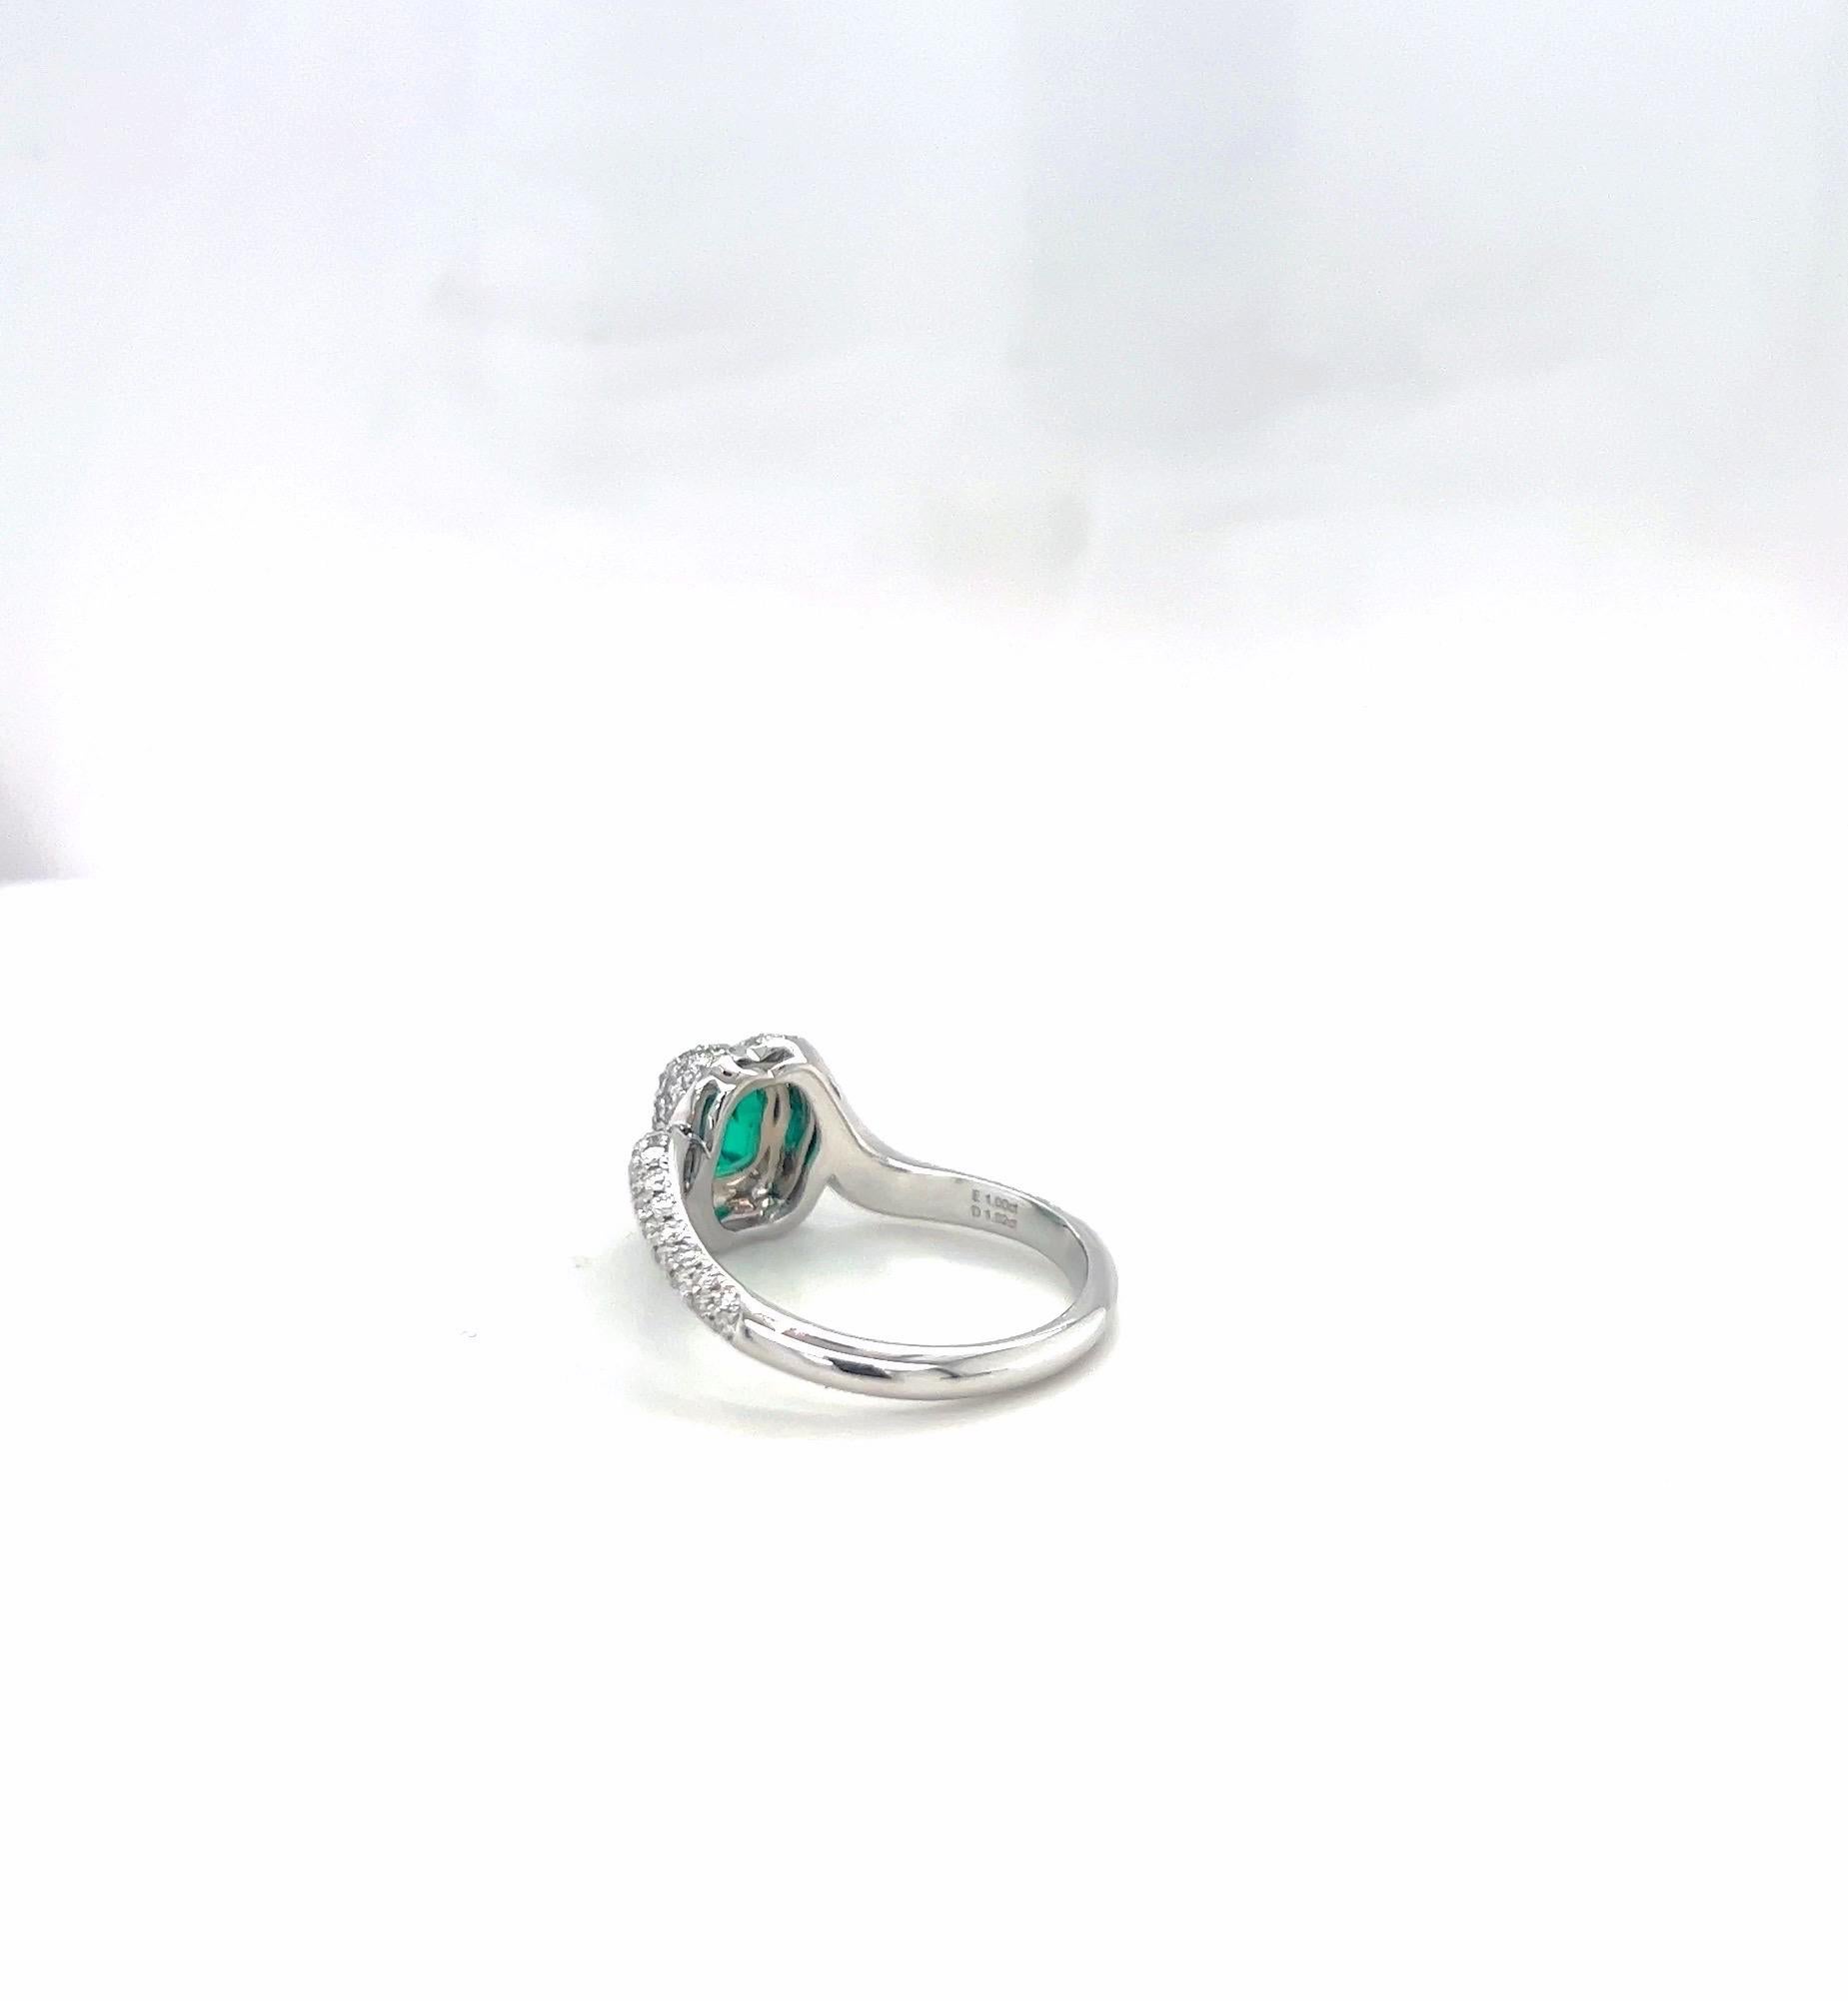 18 Karat White Gold 1.01 Ct Colombian Emerald and 1.01 Ct. Diamond Ring For Sale 1